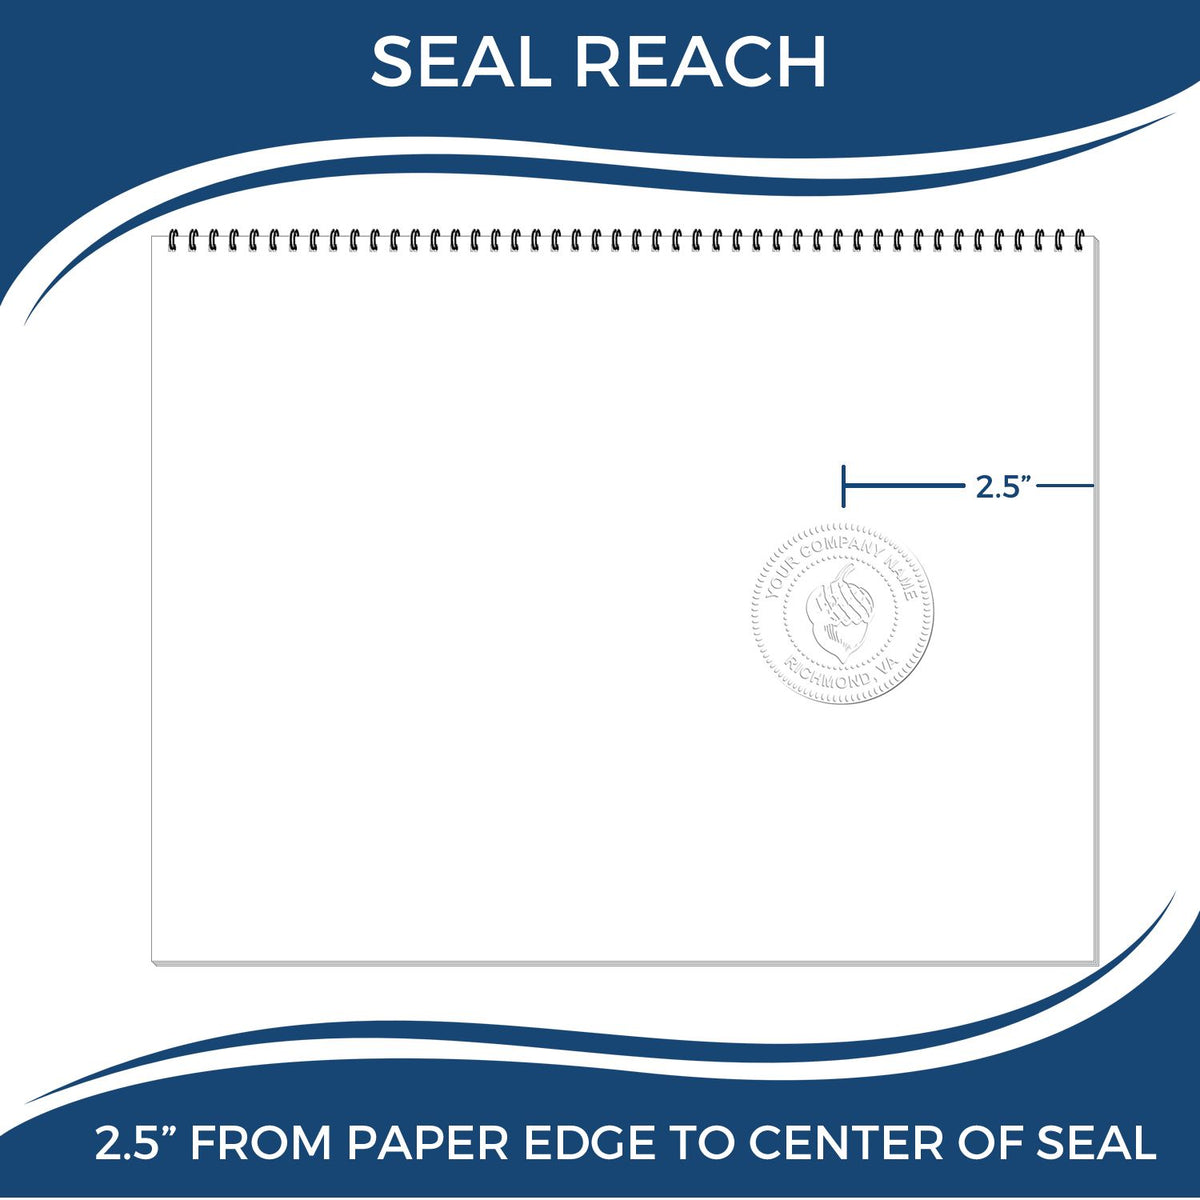 An infographic showing the seal reach which is represented by a ruler and a miniature seal image of the State of Nevada Long Reach Architectural Embossing Seal